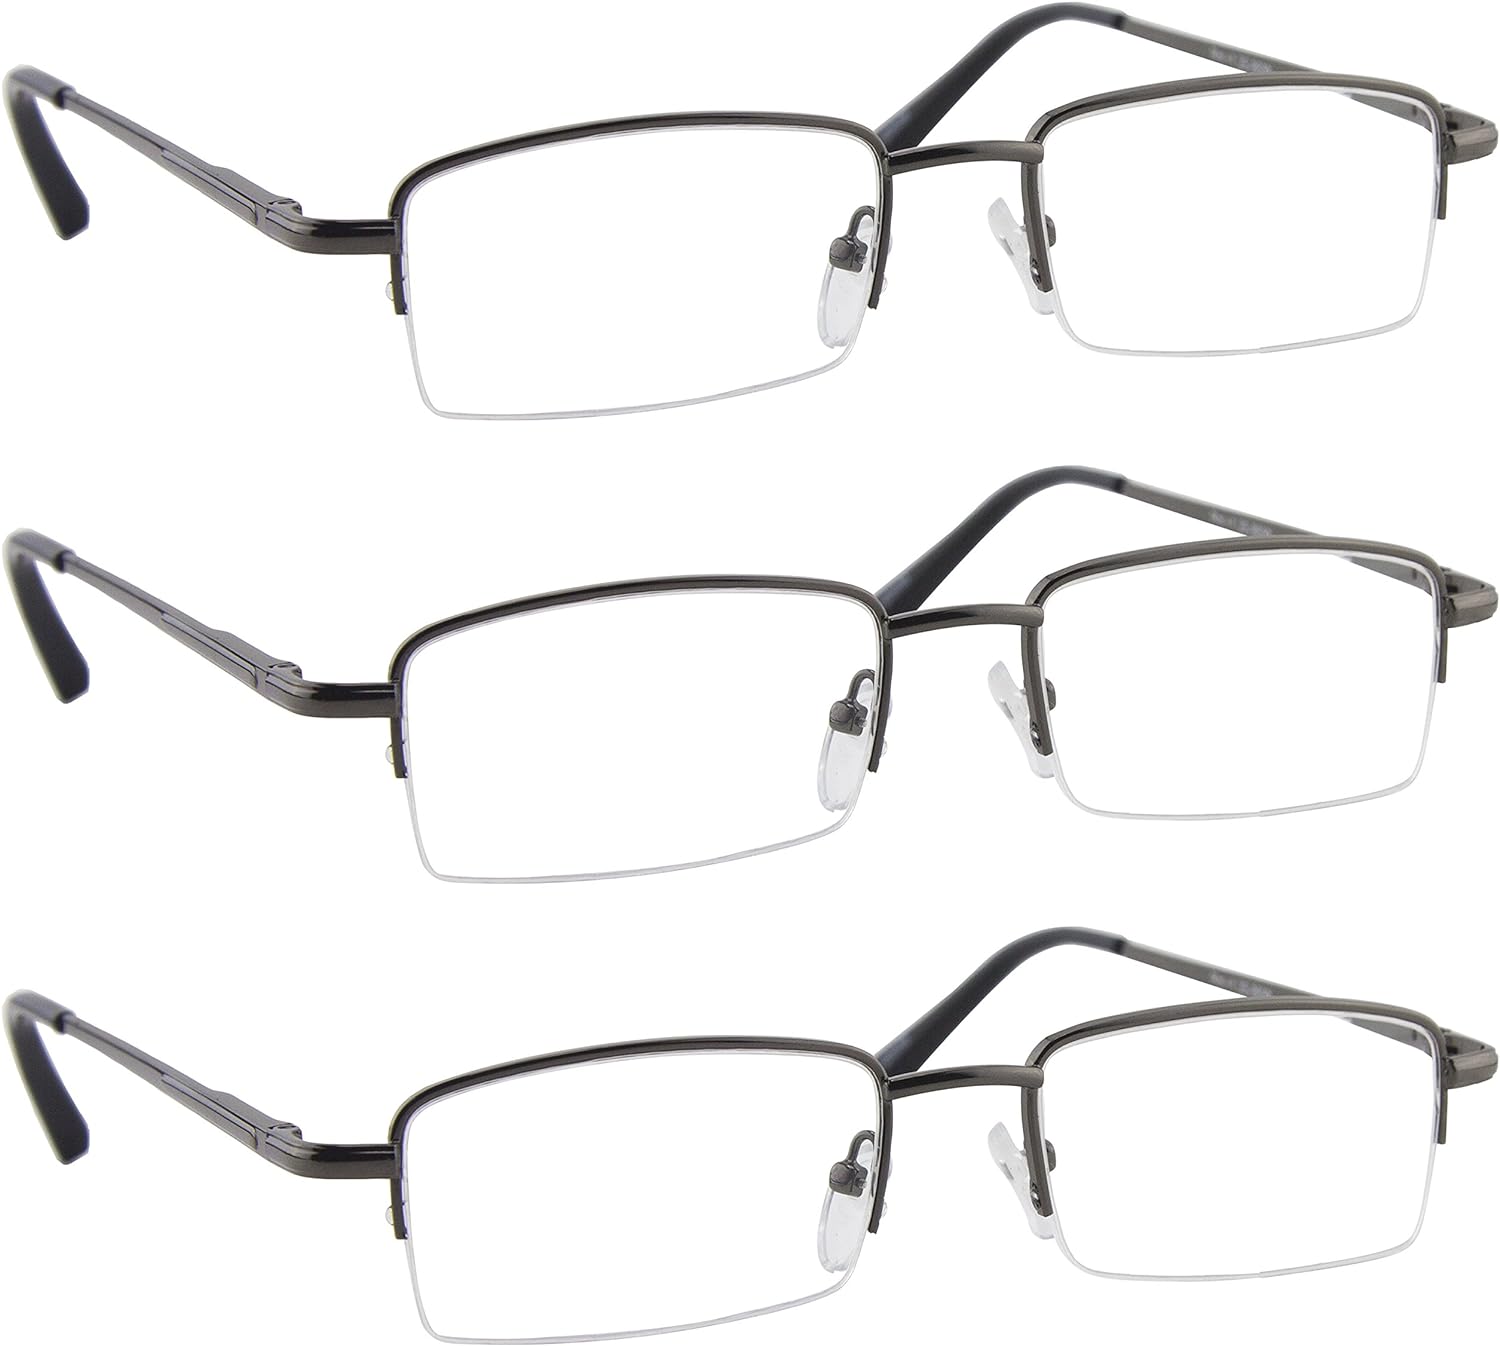 Reading Glasses - Readers with Comfort Spring Hinges for Men and Women by TruVision Readers - 9509HP